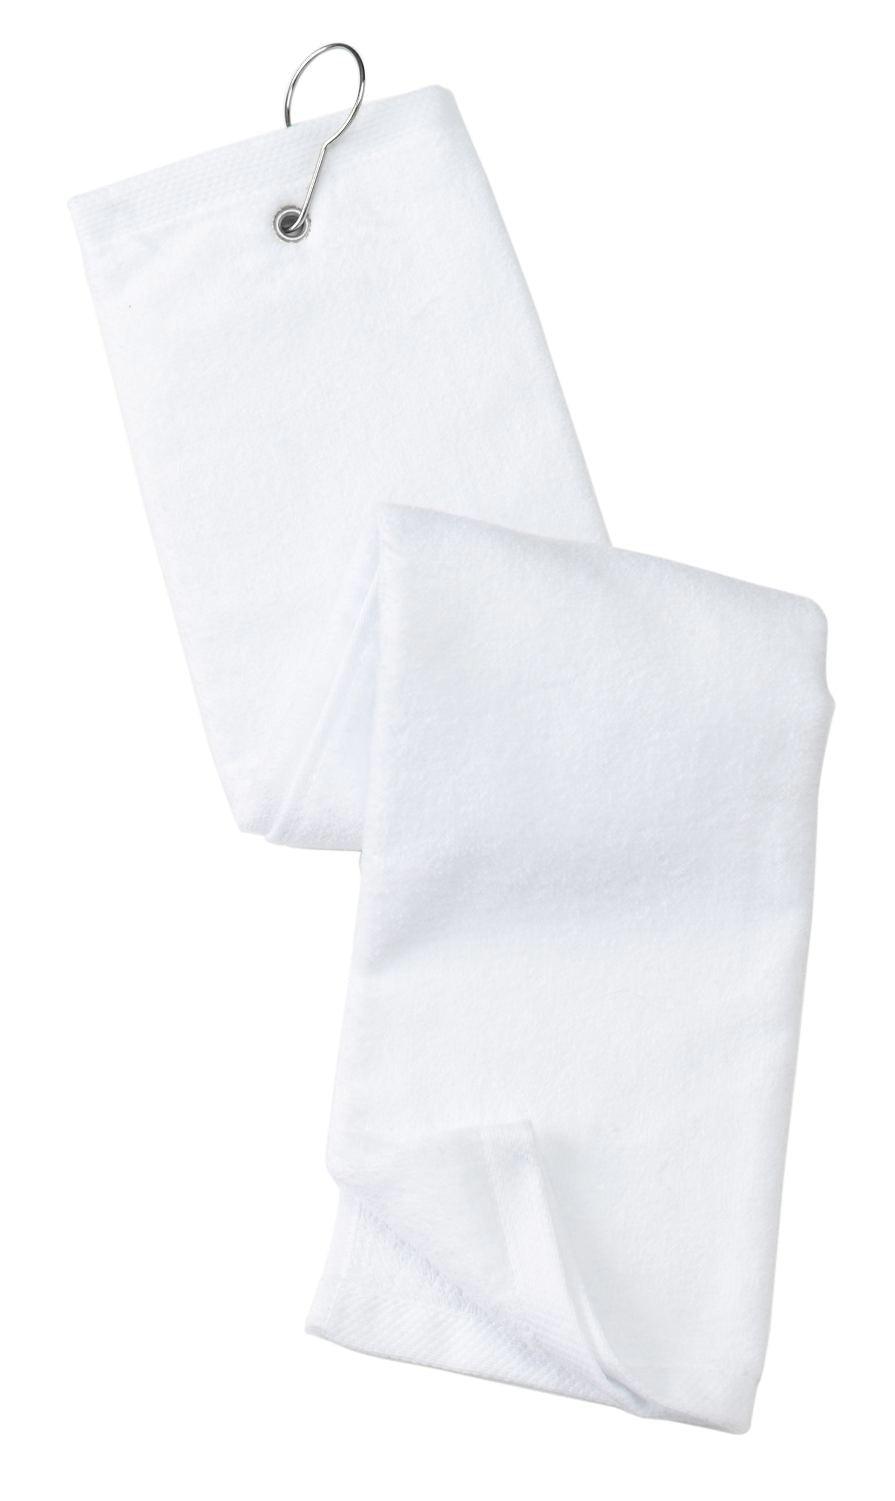 Port Authority Grommeted Tri-Fold Golf Towel. TW50 - Dresses Max